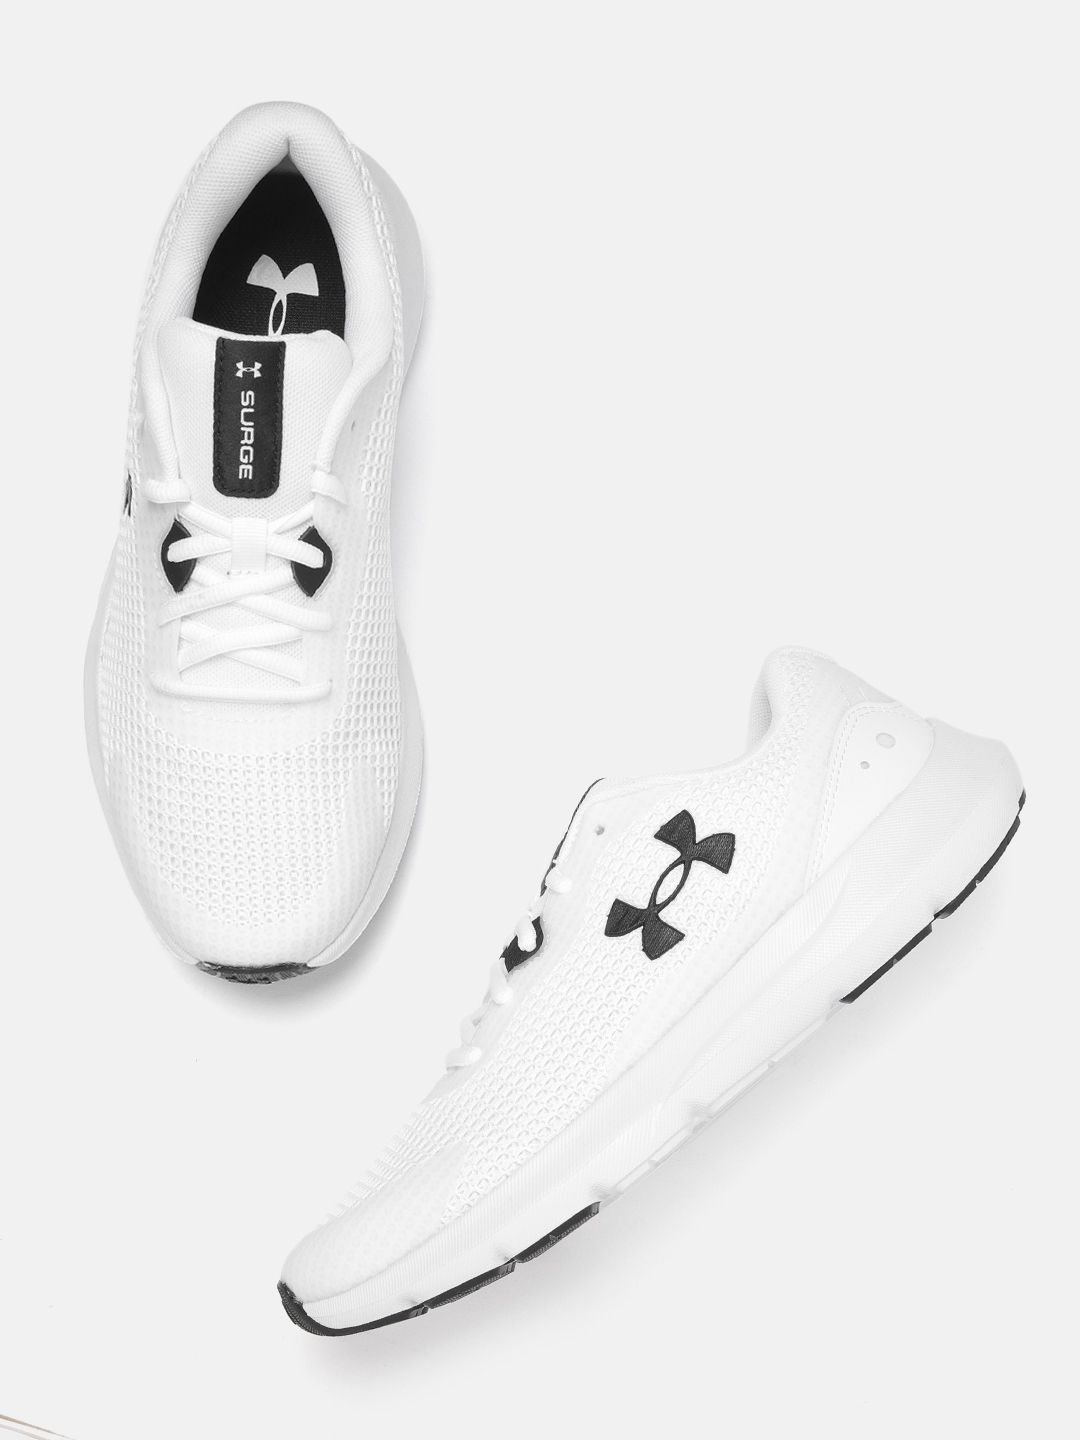 UNDER ARMOUR Women White Woven Design Surge 3 Running Shoes Price in India